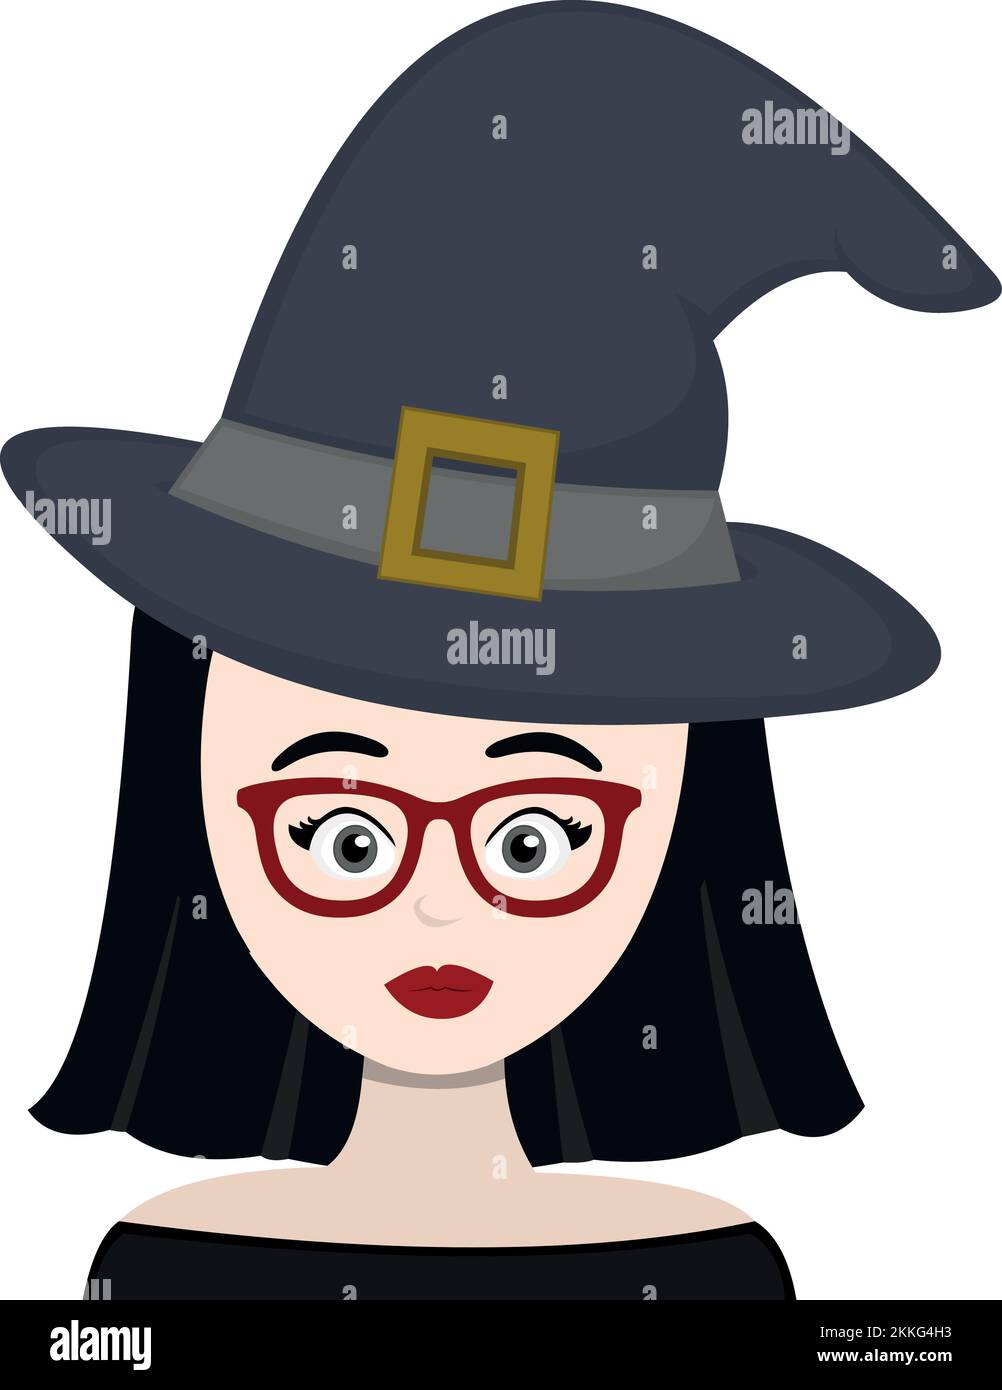 vector illustration of a cartoon witch with red glasses Stock Vector